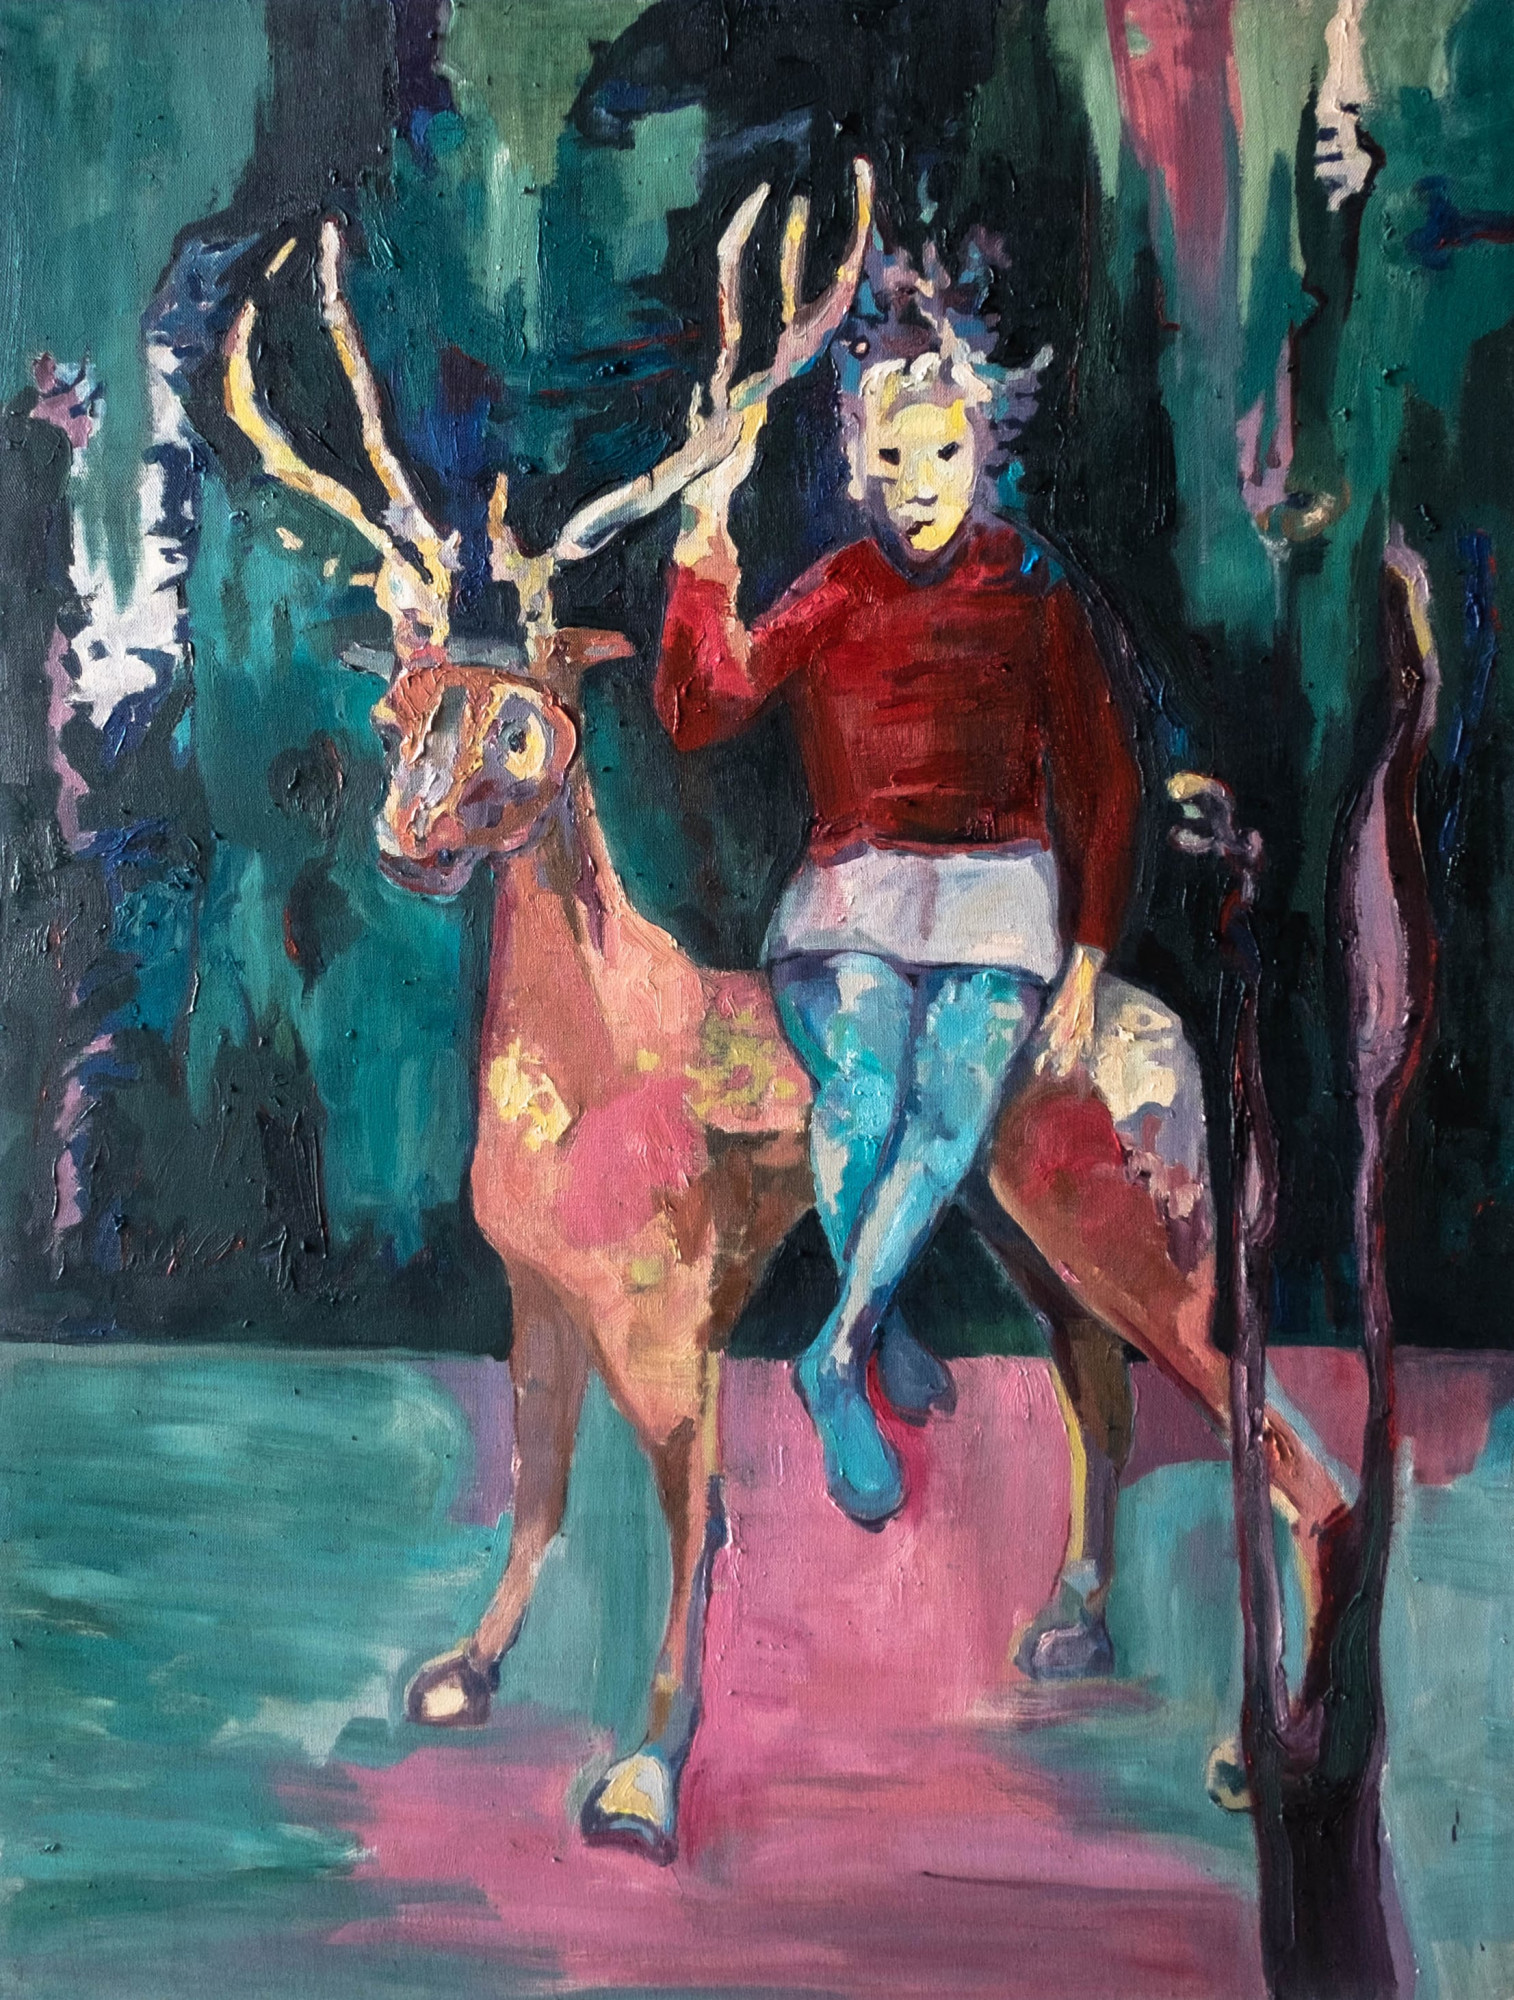 Guest I, 2019. From the Like a Merry-Go-Round in Childhood: Forest Deer series. Plutitskaya creates a post-apocalyptic landscape where the ruins of a Soviet building appear to be in a fairy-tale jungle space